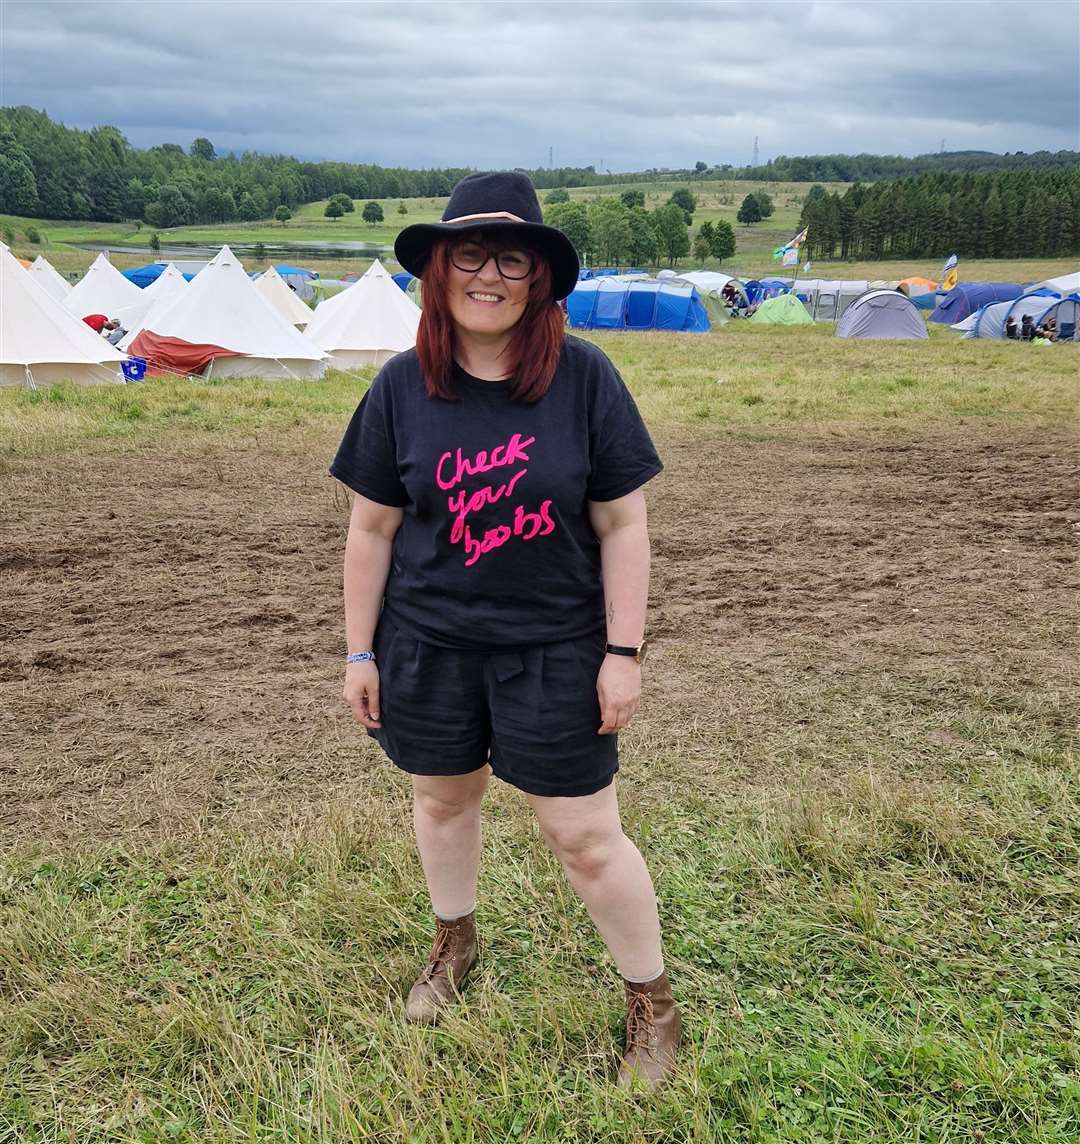 Kimberely at the Kendal Calling music festival.